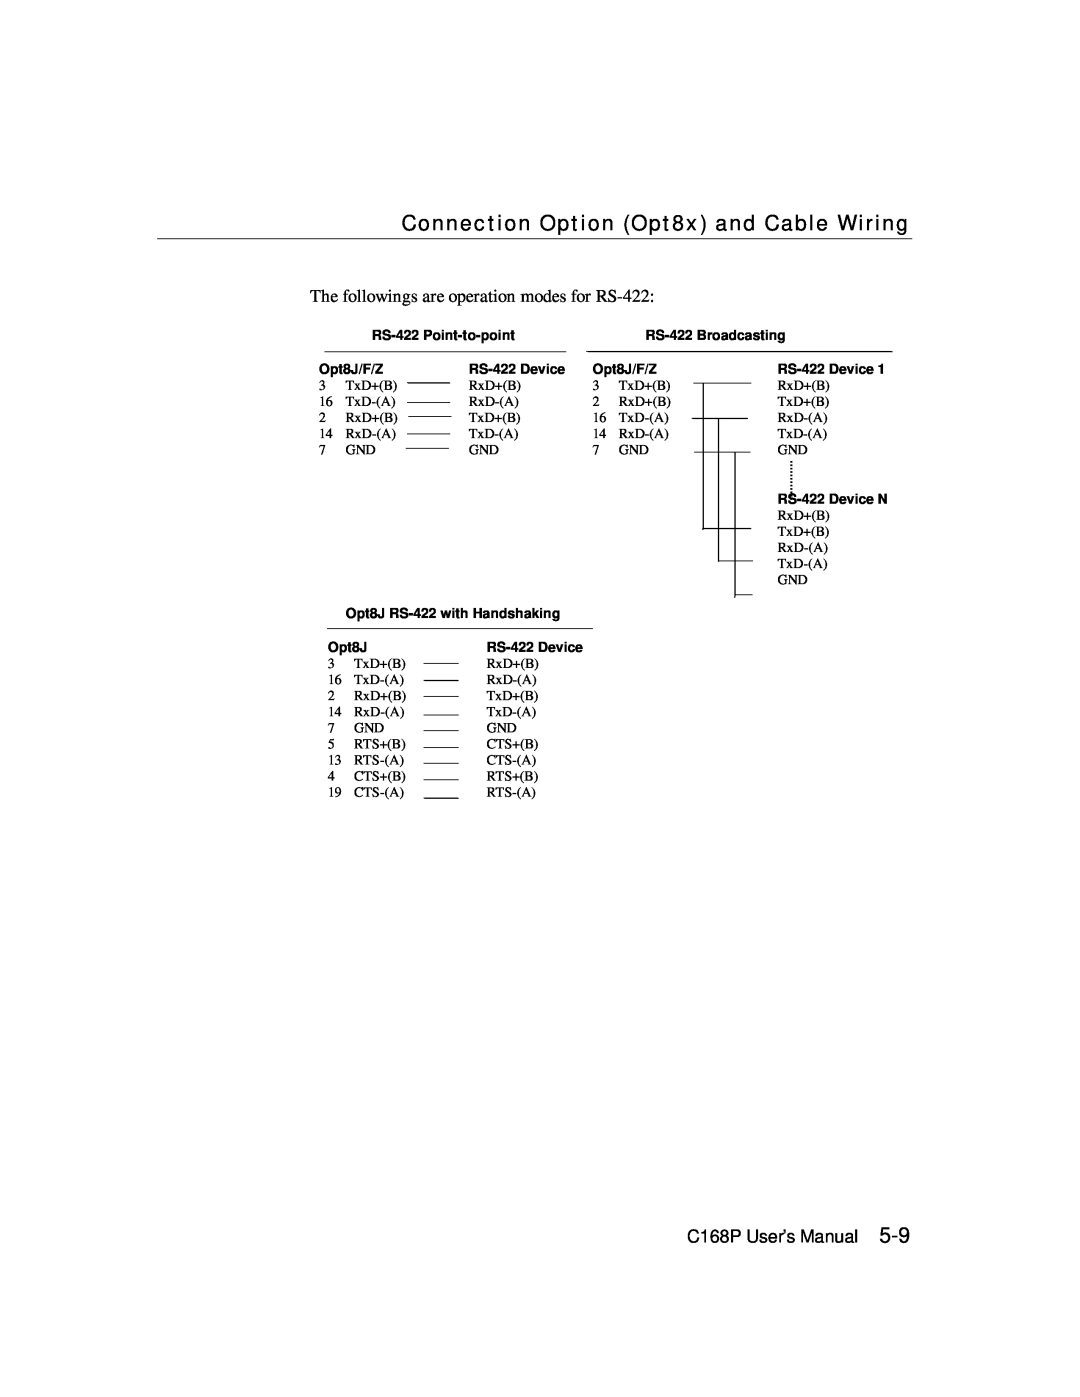 Moxa Technologies Connection Option Opt8x and Cable Wiring, C168P User’s Manual, RS-422 Point-to-point, Opt8J/F/Z 